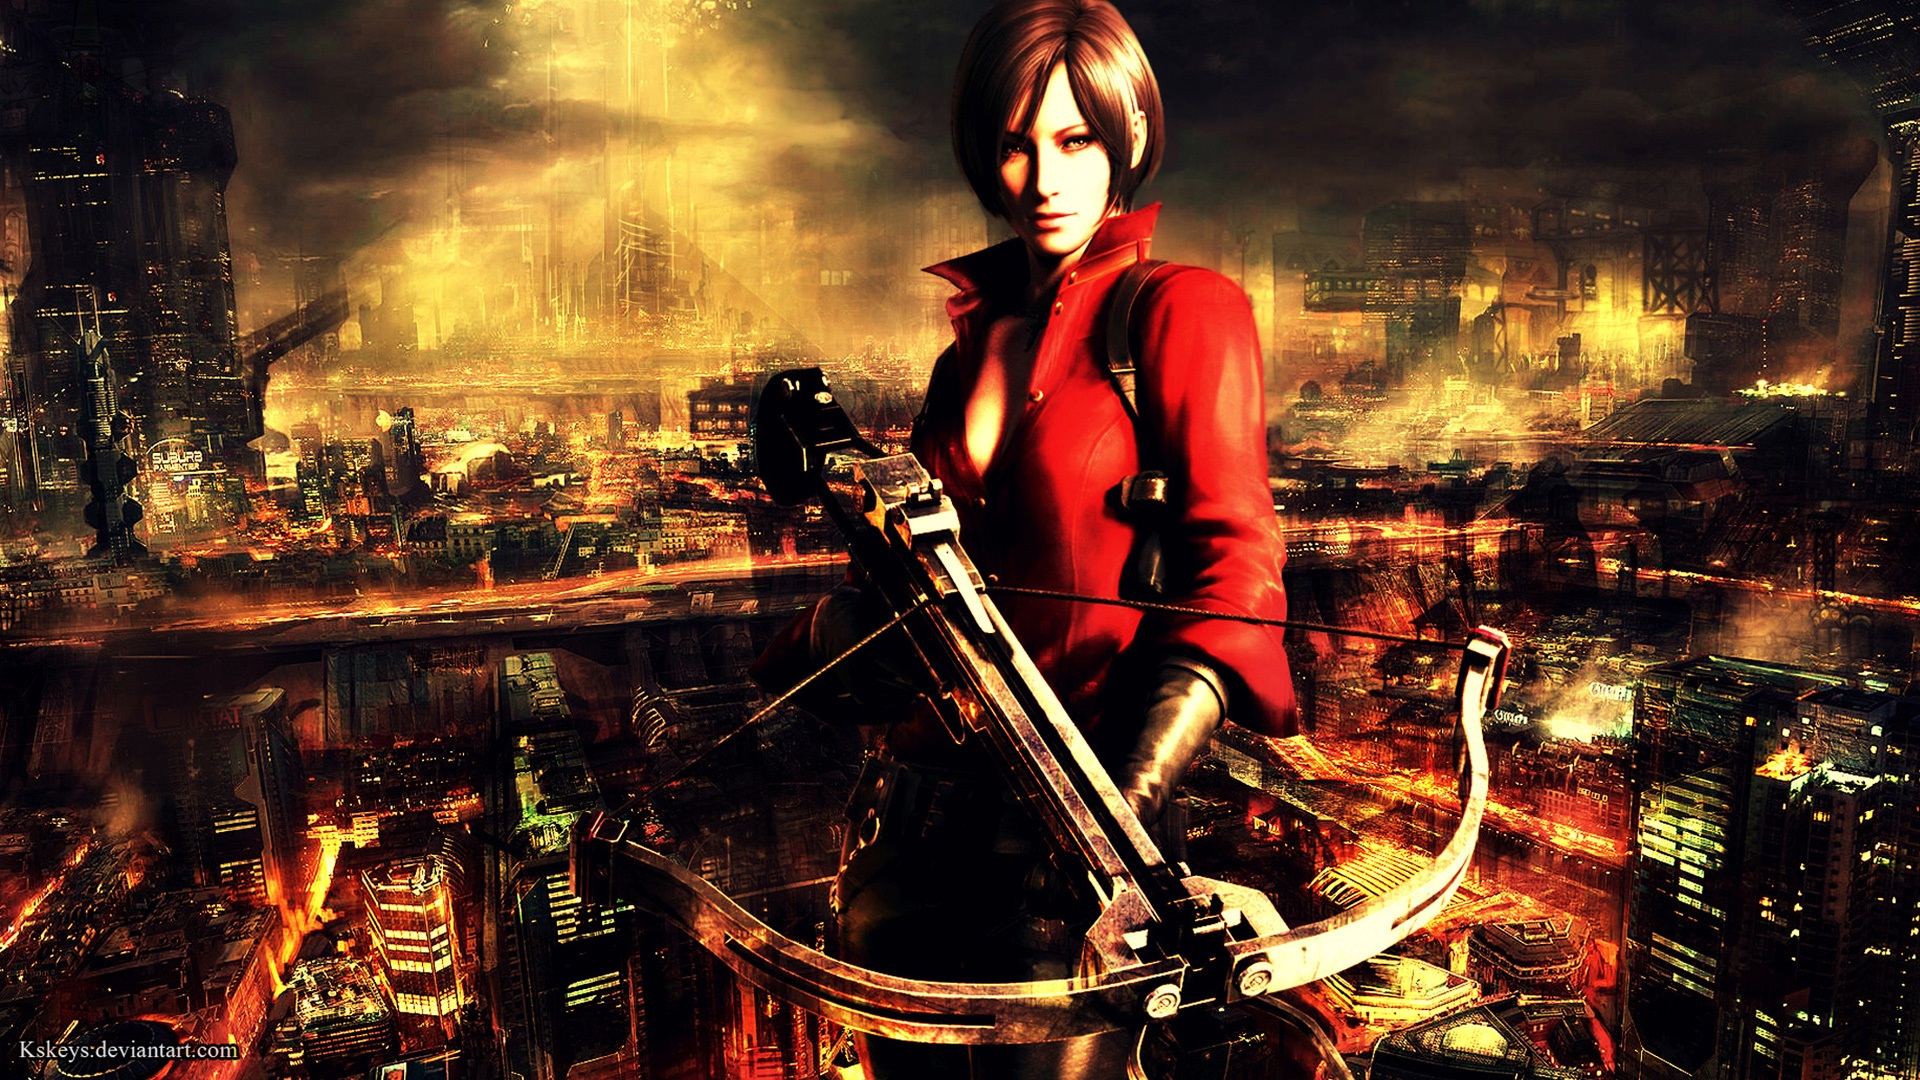 Resident Evil 6 HD game wallpapers #7 - 1920x1080